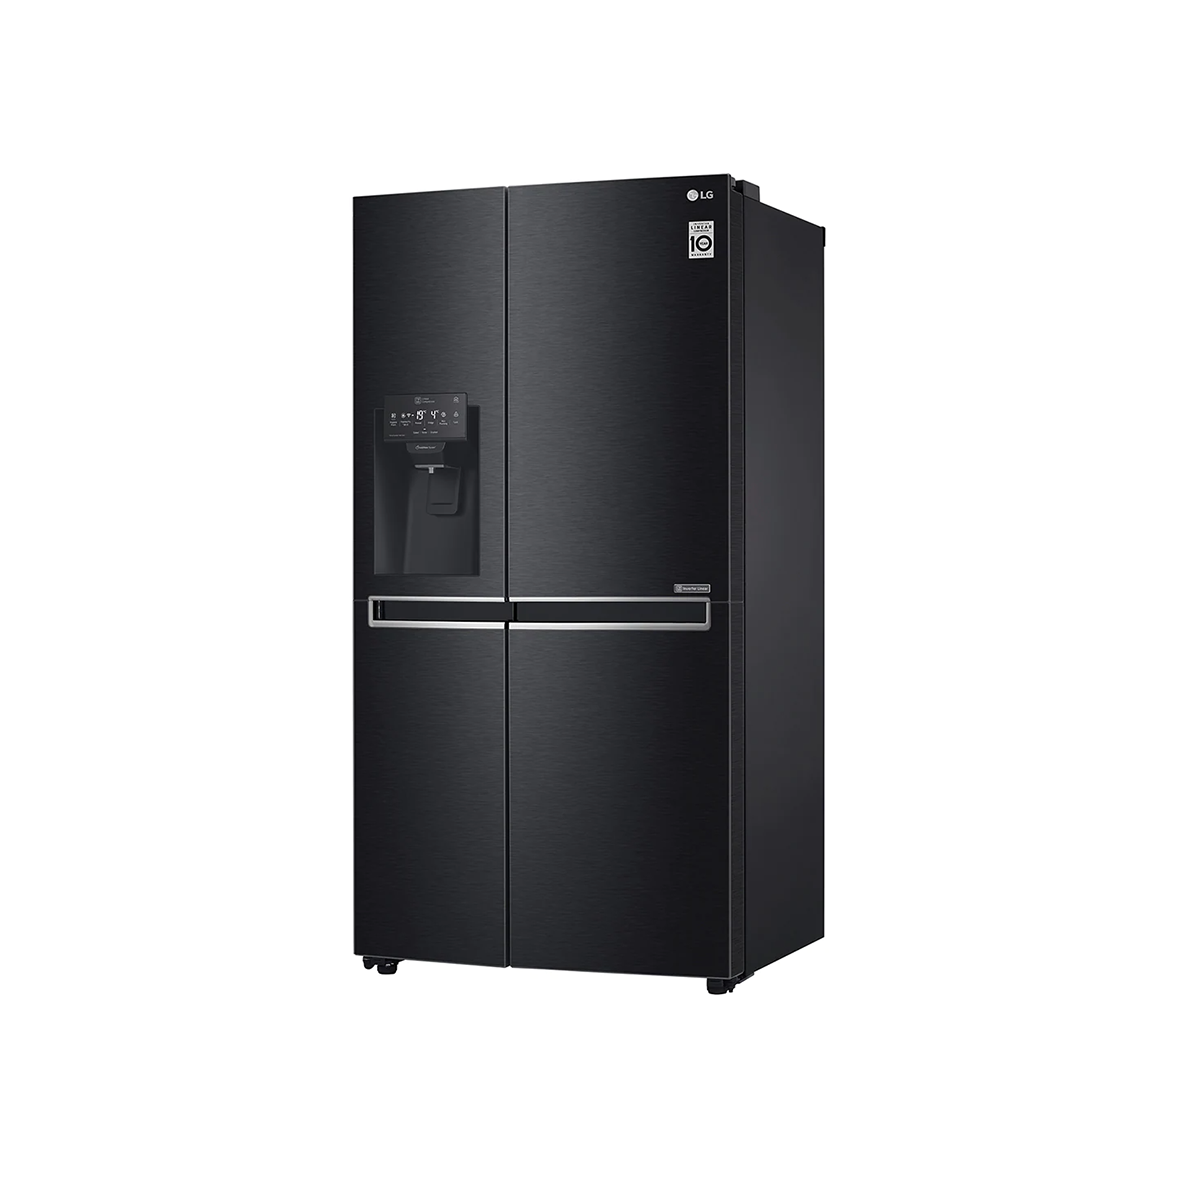 LG 668L Side-by-Side Refrigerator with Door Cooling+ Technology